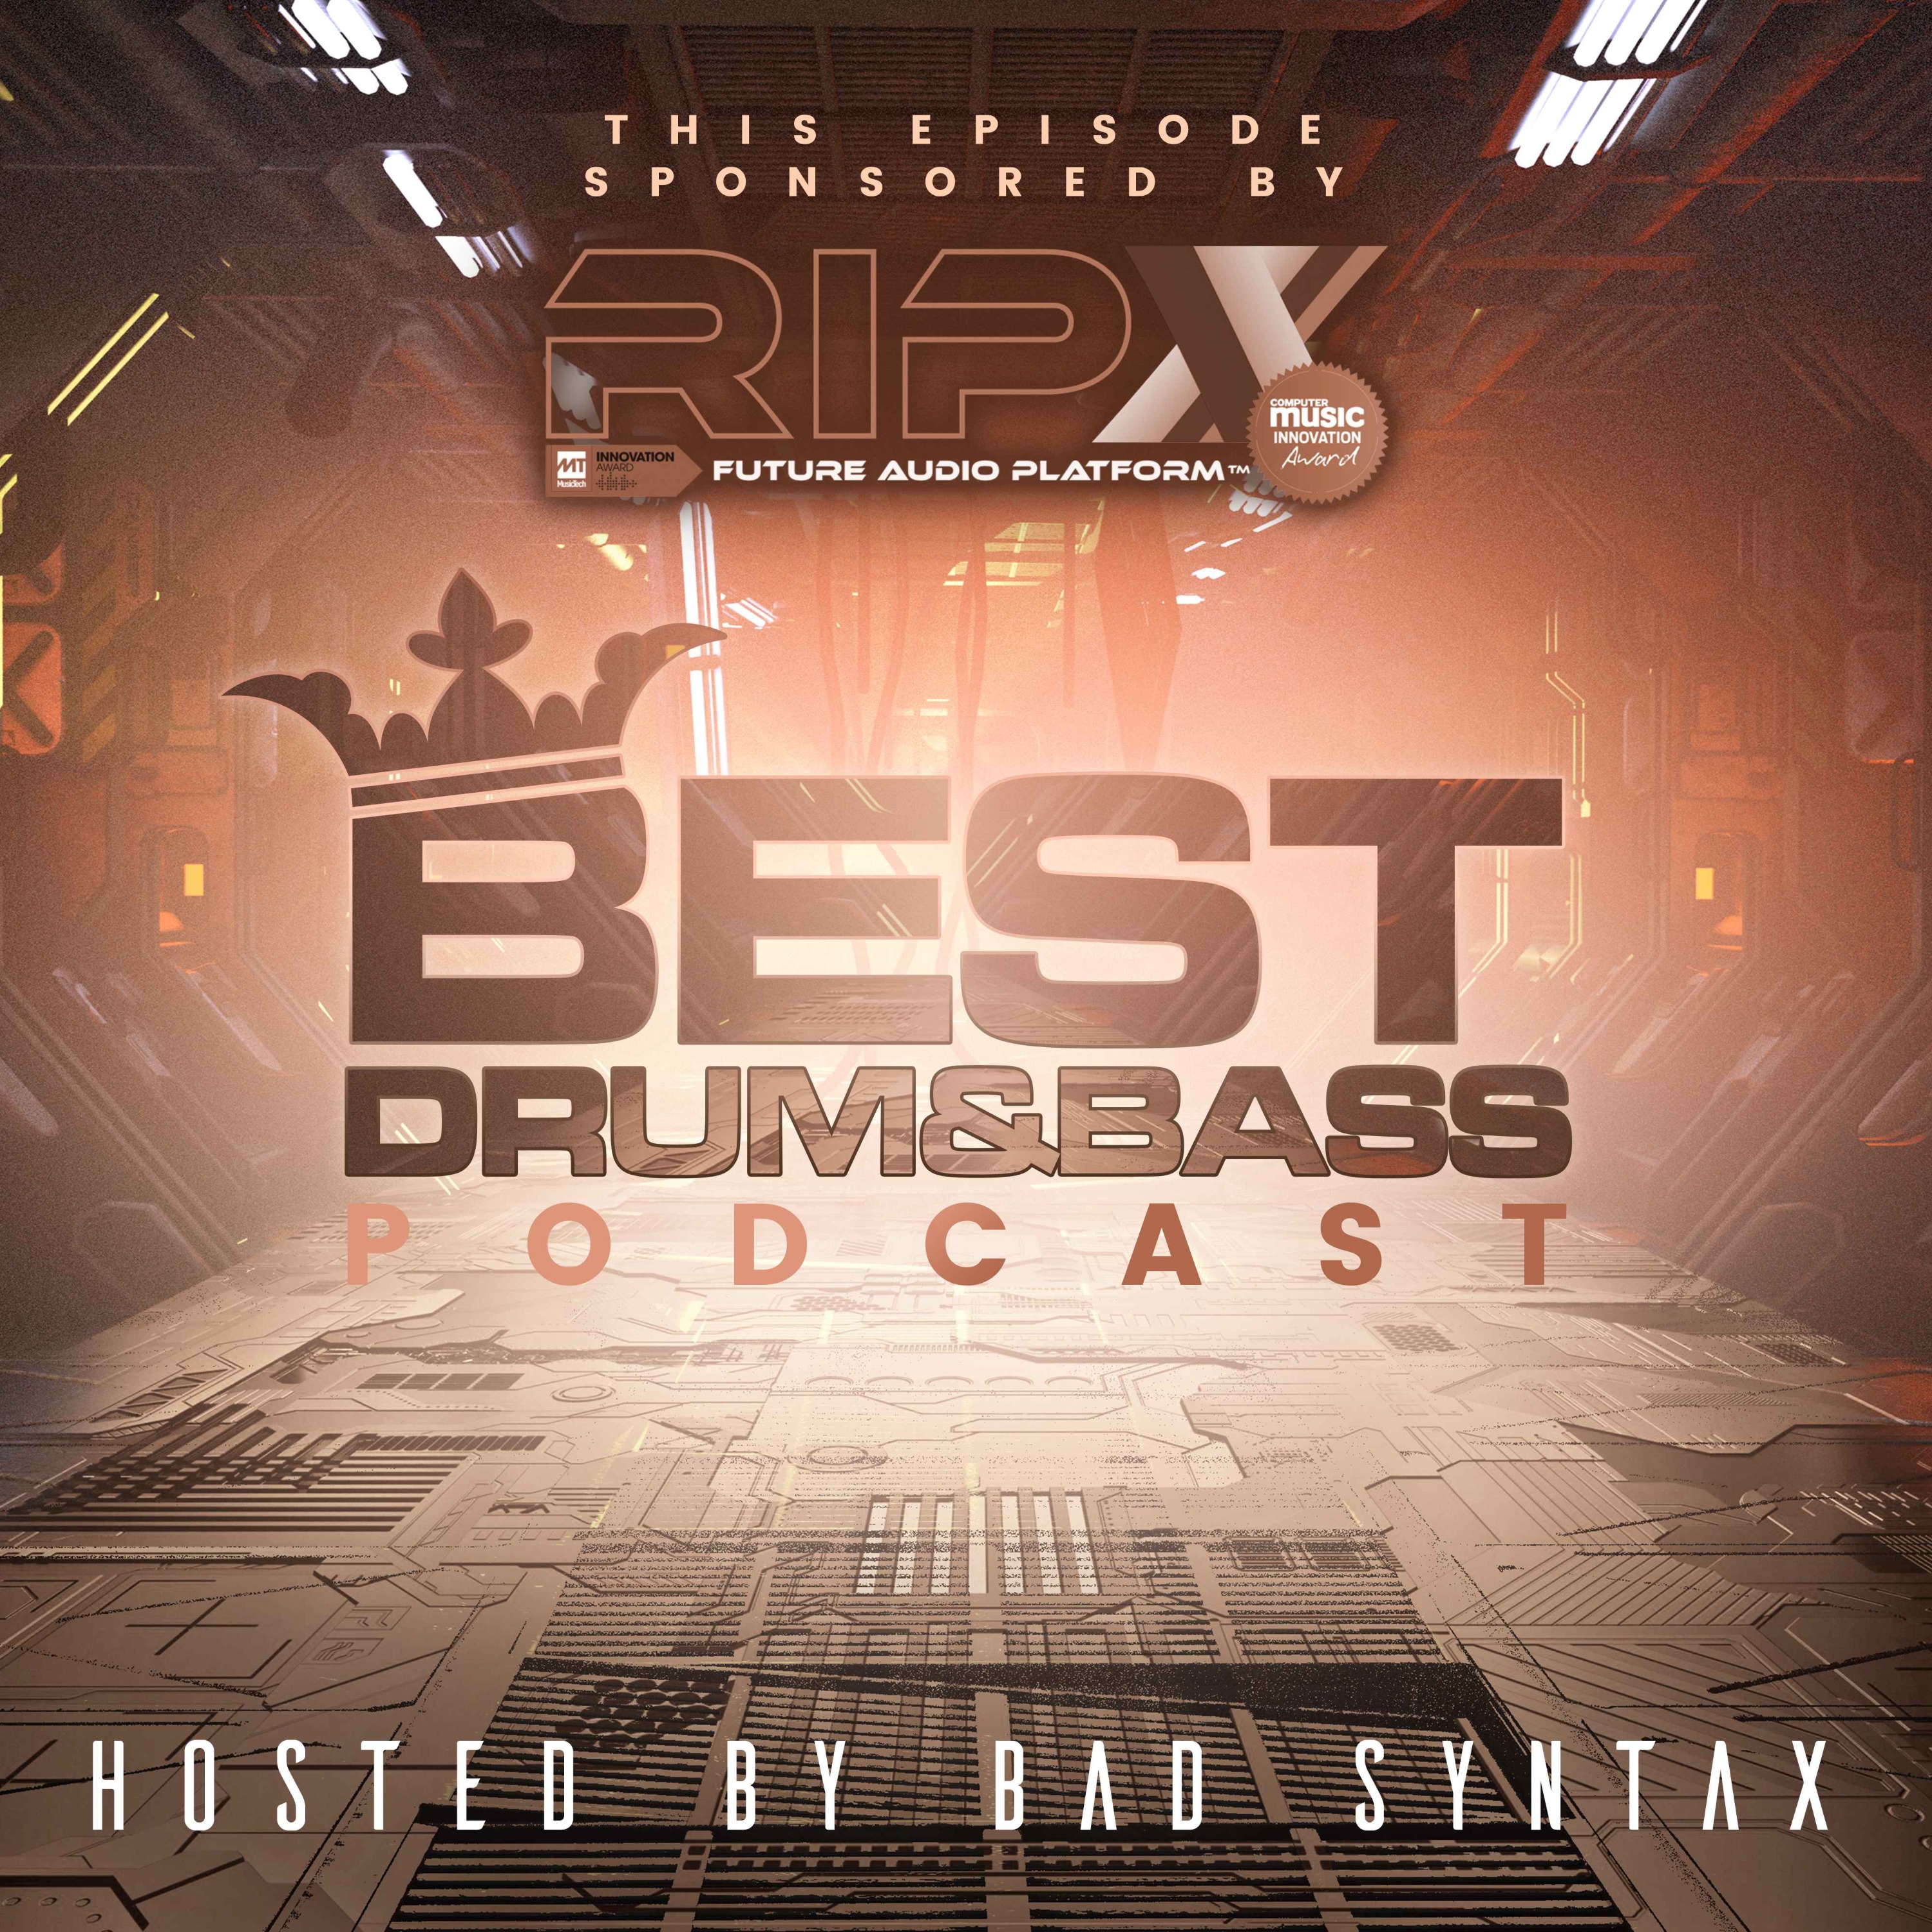 Podcast 388 - Bad Syntax & FauxRealz [Sponsored by RipX] Artwork